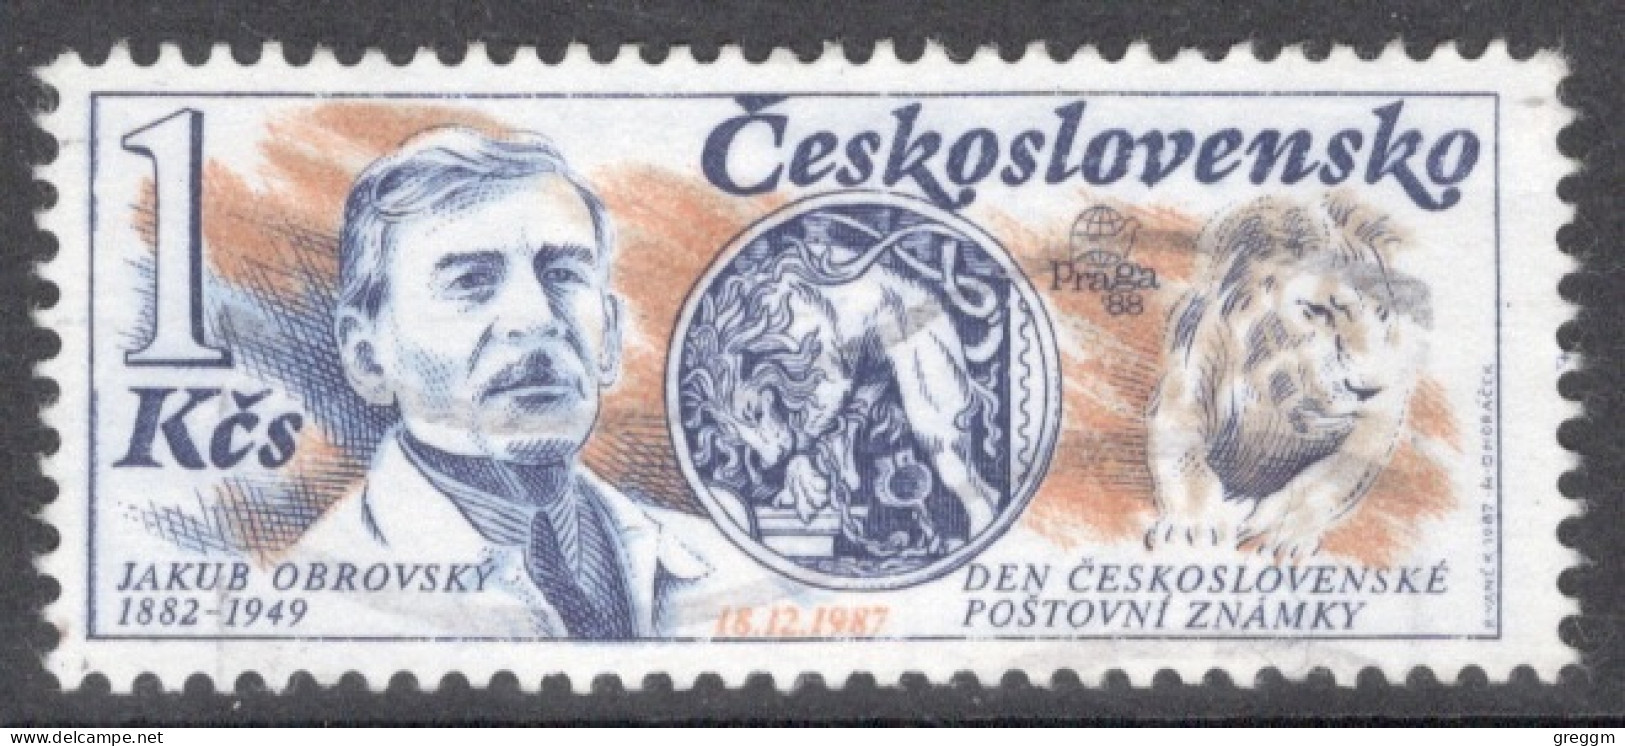 Czechoslovakia 1987 Single Stamp For The 105th Anniversary Of The Birth Of Jakub Obrovsky ,Stamp Designer In Fine Used - Usados